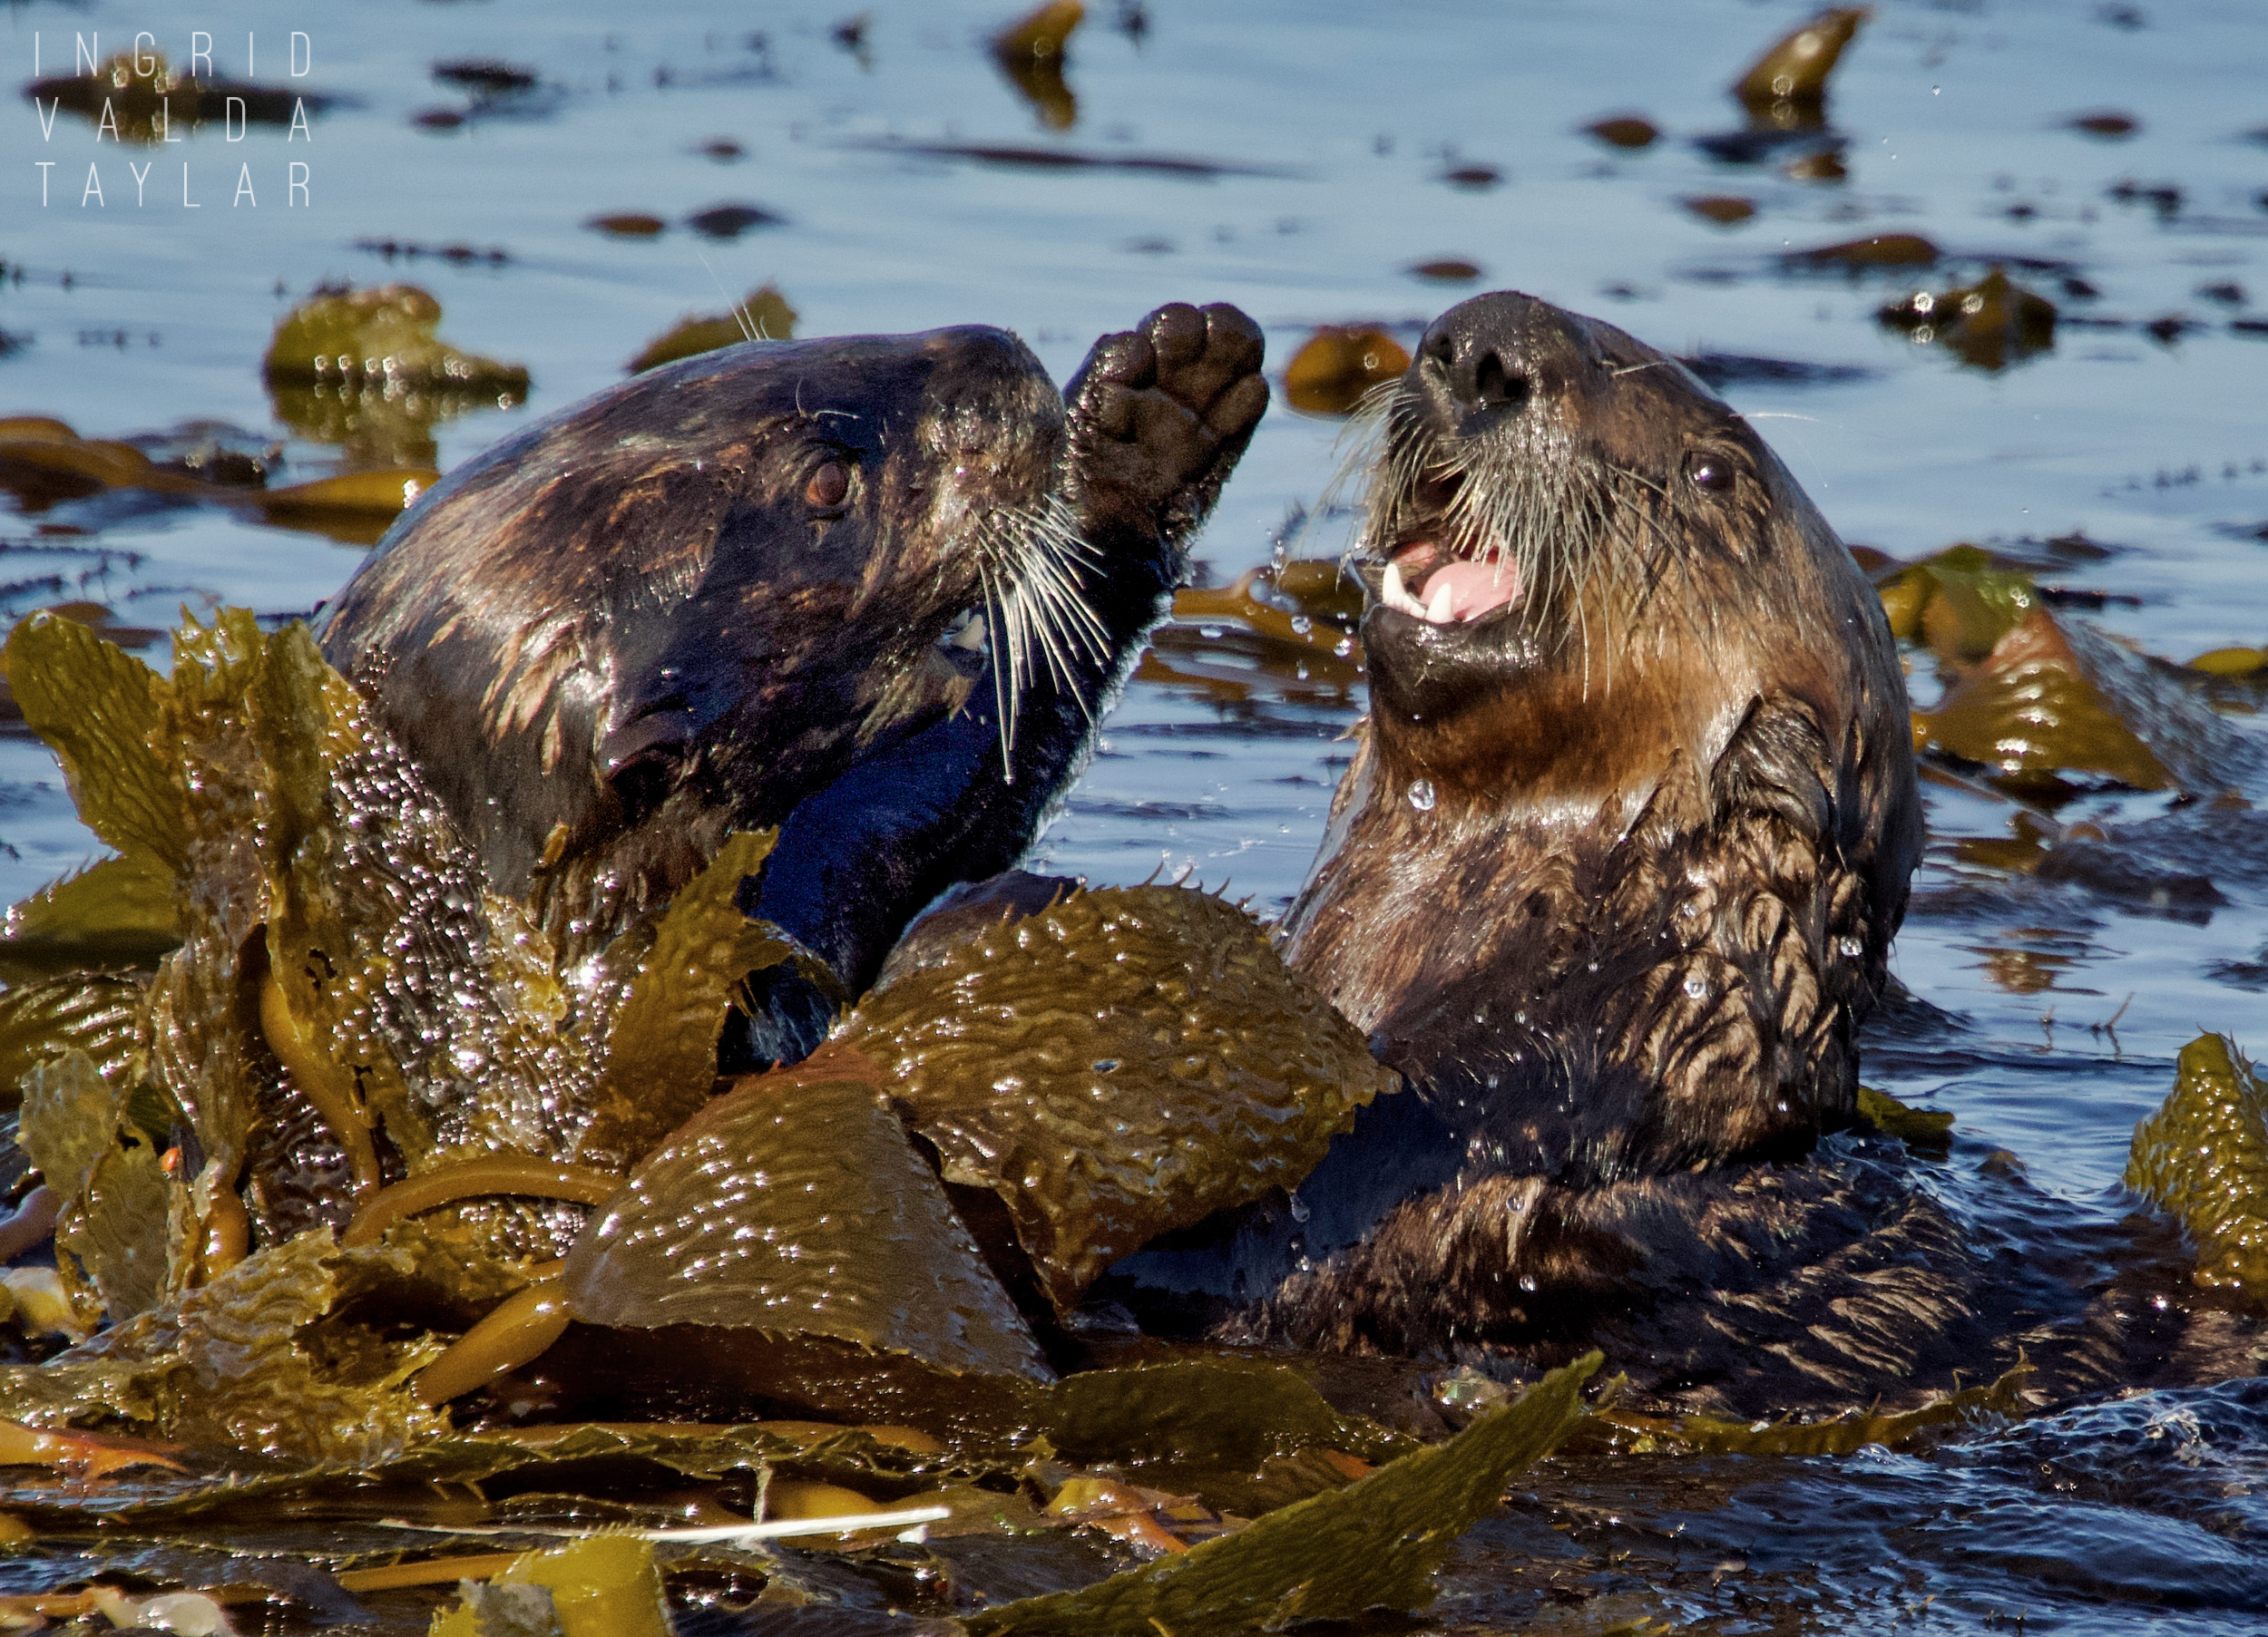 Southern Sea Otters at Play in Monterey Bay